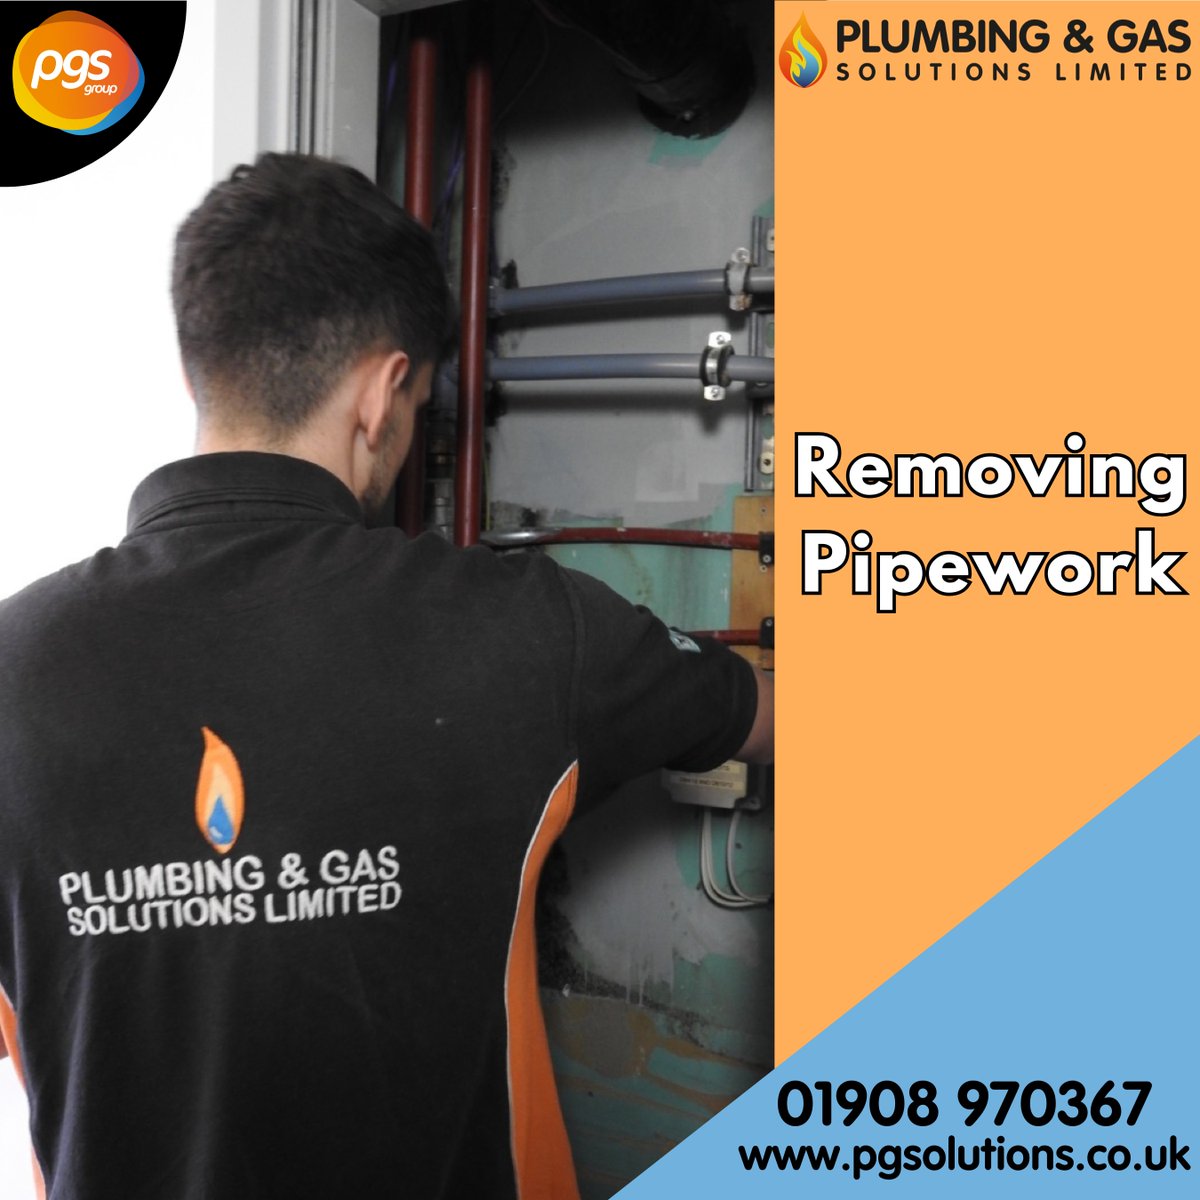 This client experienced leaking in their building, so we've removed their pipework so that the plasterboard can be replaced. We'll replace damaged pipework as necessary, once the plasterboard project has been completed. 🛠 For all your plumbing needs, call PGS. 01908 970367 📞